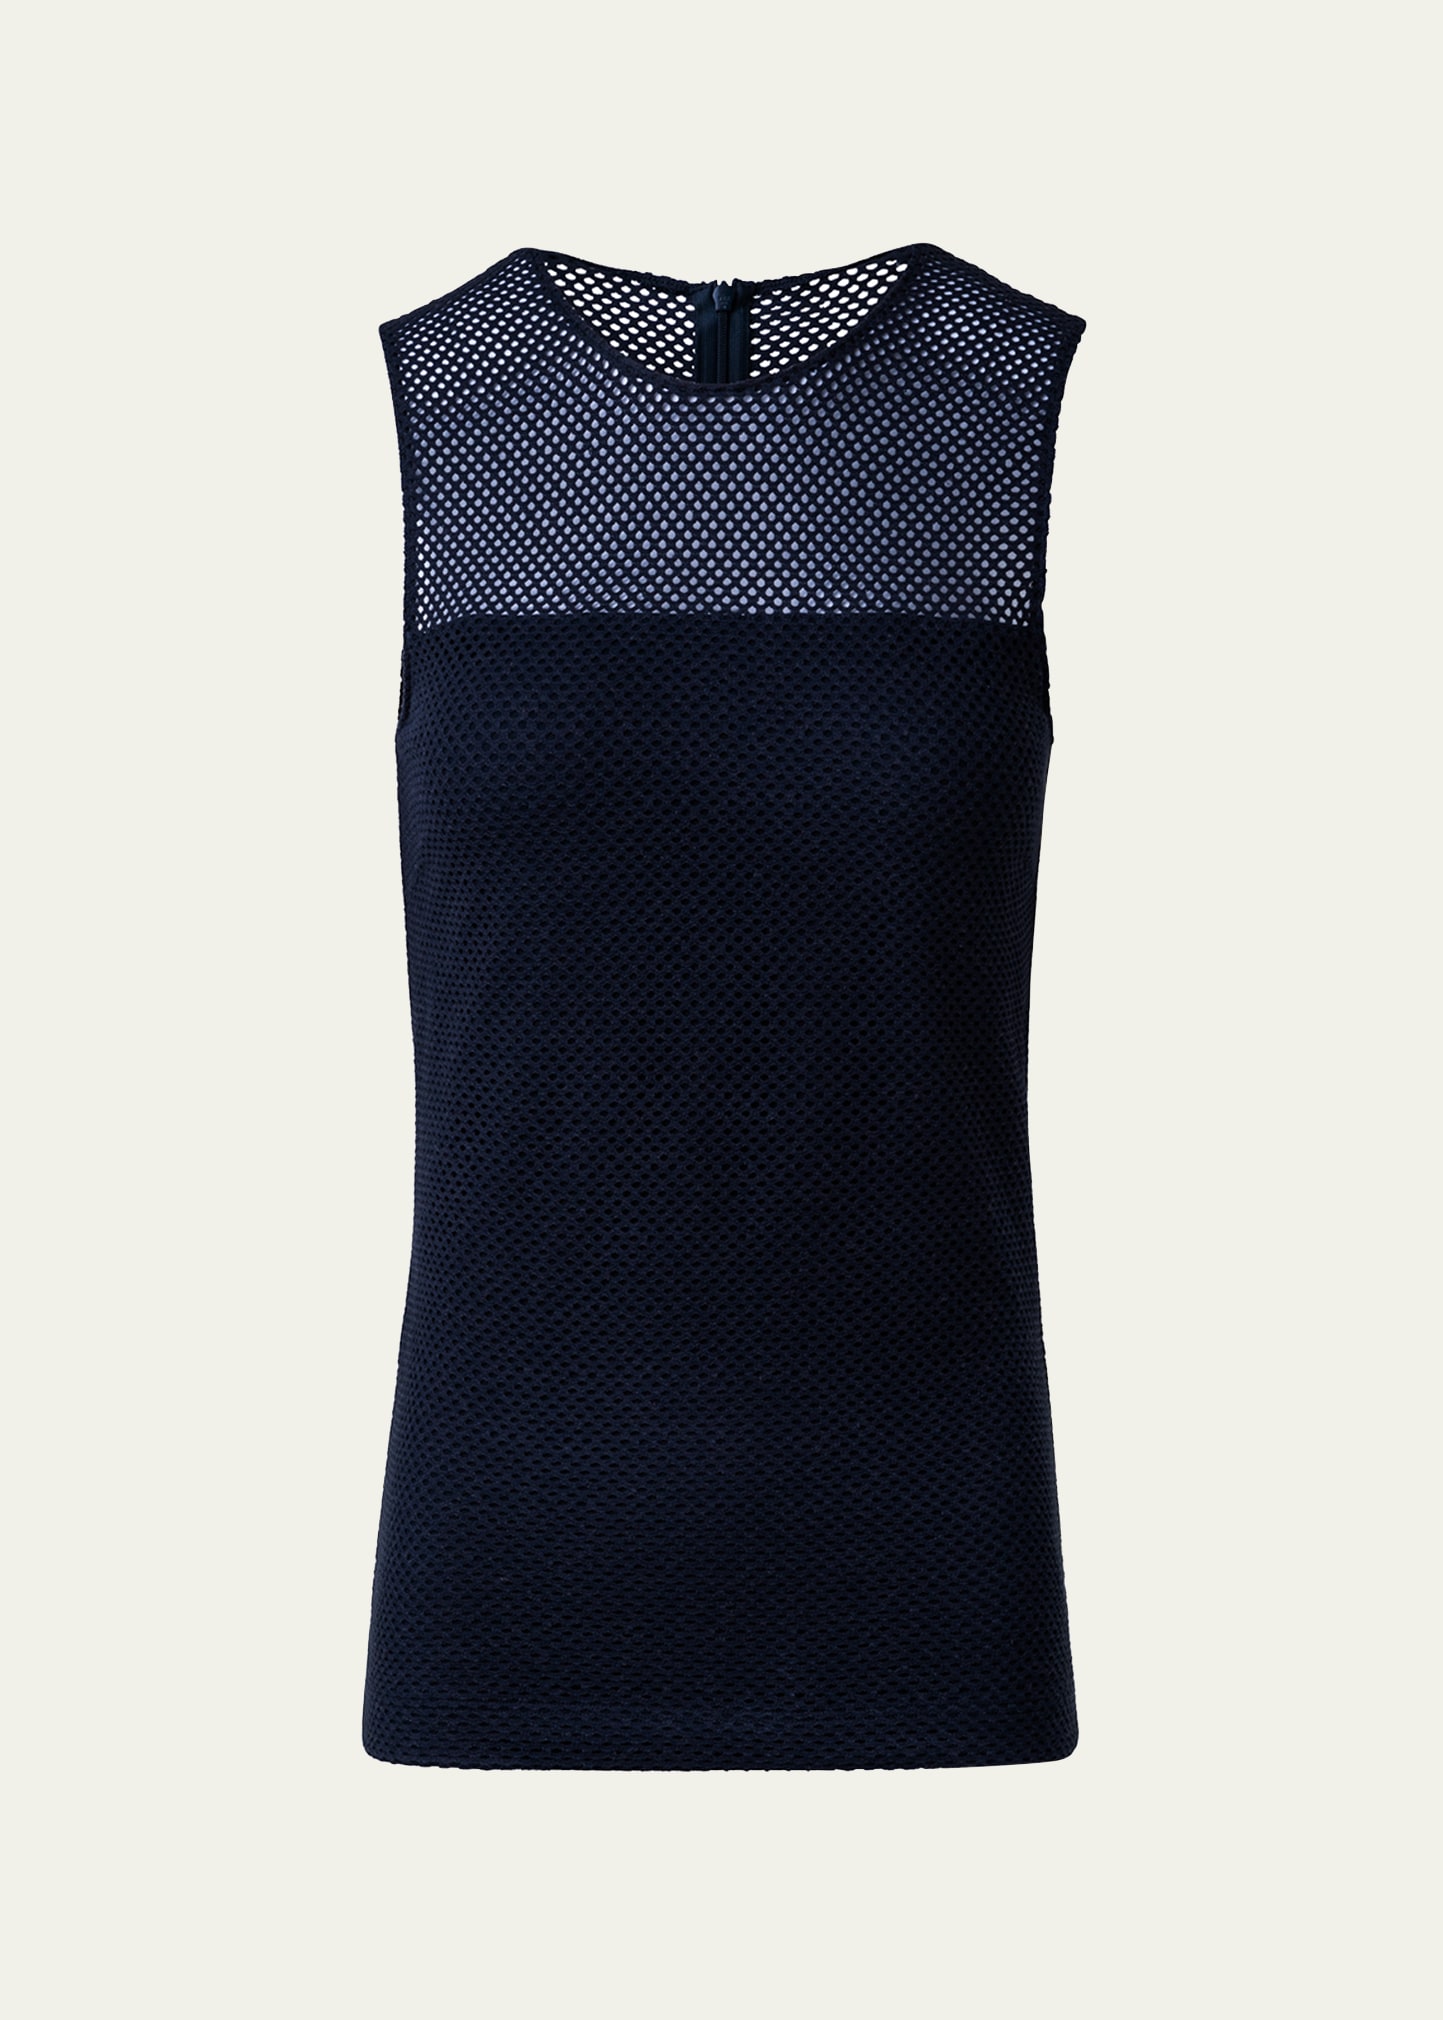 Akris Punto Mesh Fitted Shirt In Navy